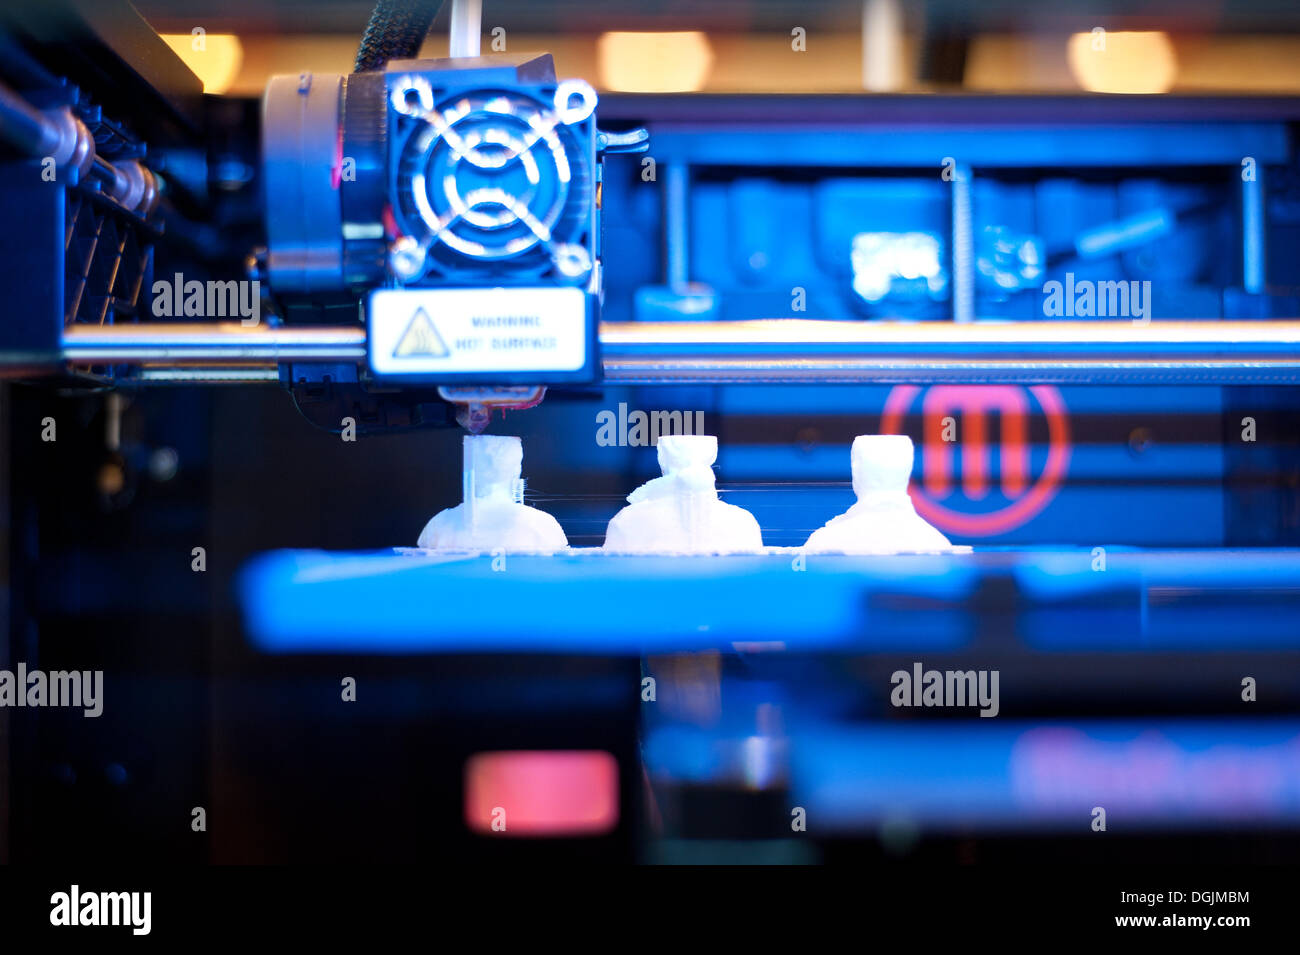 London, UK - 22 October 2013: a 3D printer during the Apps World exhibition at Earl's Court in London. Credit:  Piero Cruciatti/Alamy Live News Stock Photo